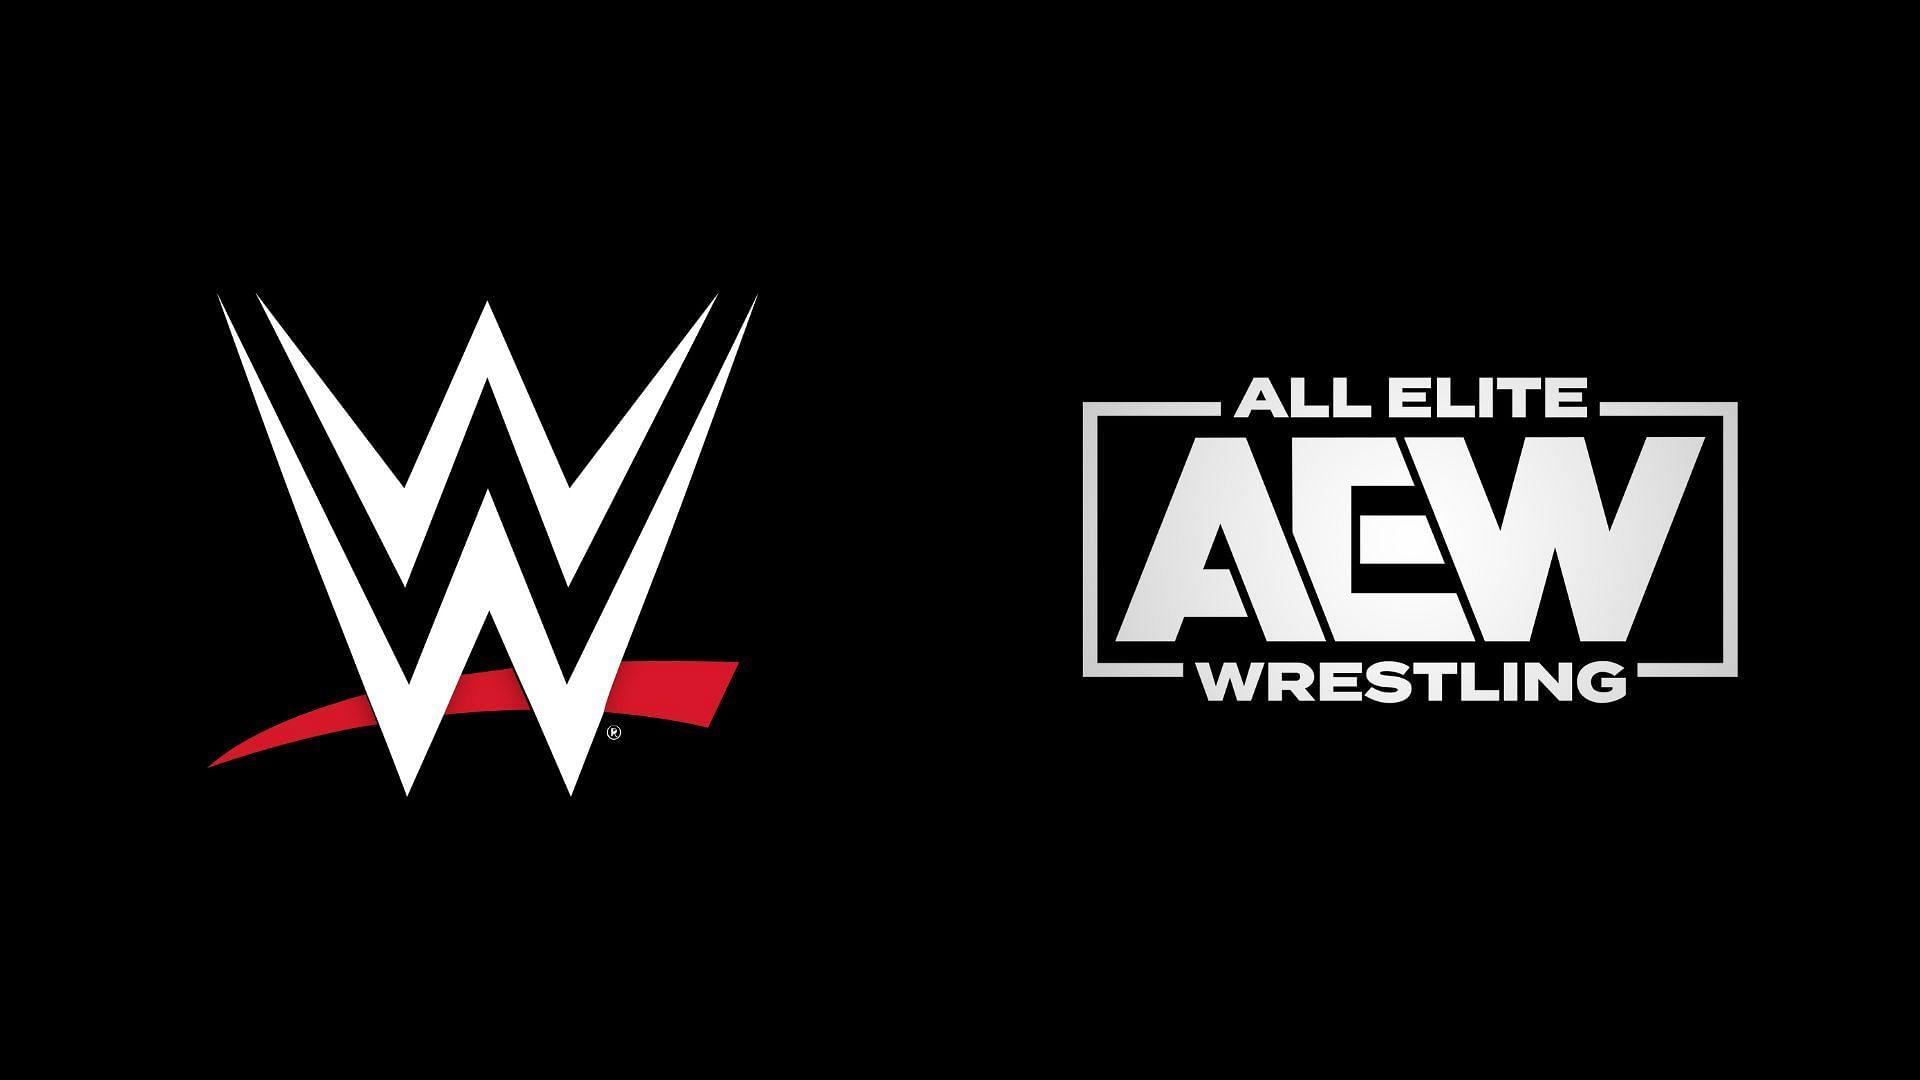 AEW has many former WWE superstars on its roster